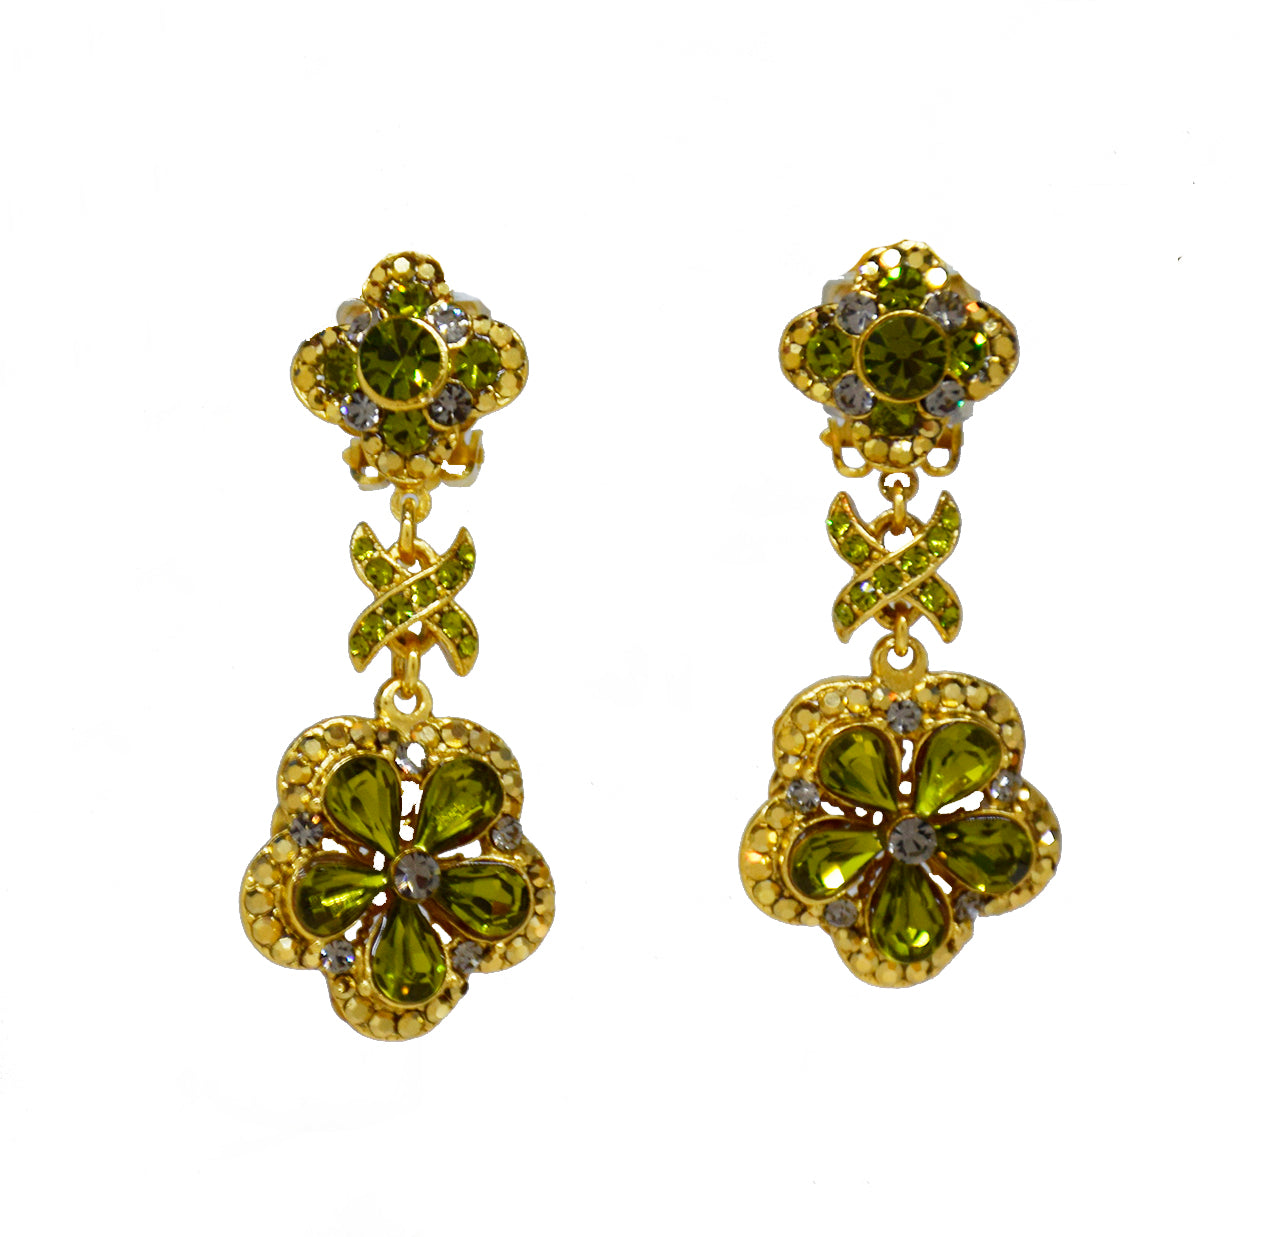 132  Small flower drop clip earring with gold olivine stone